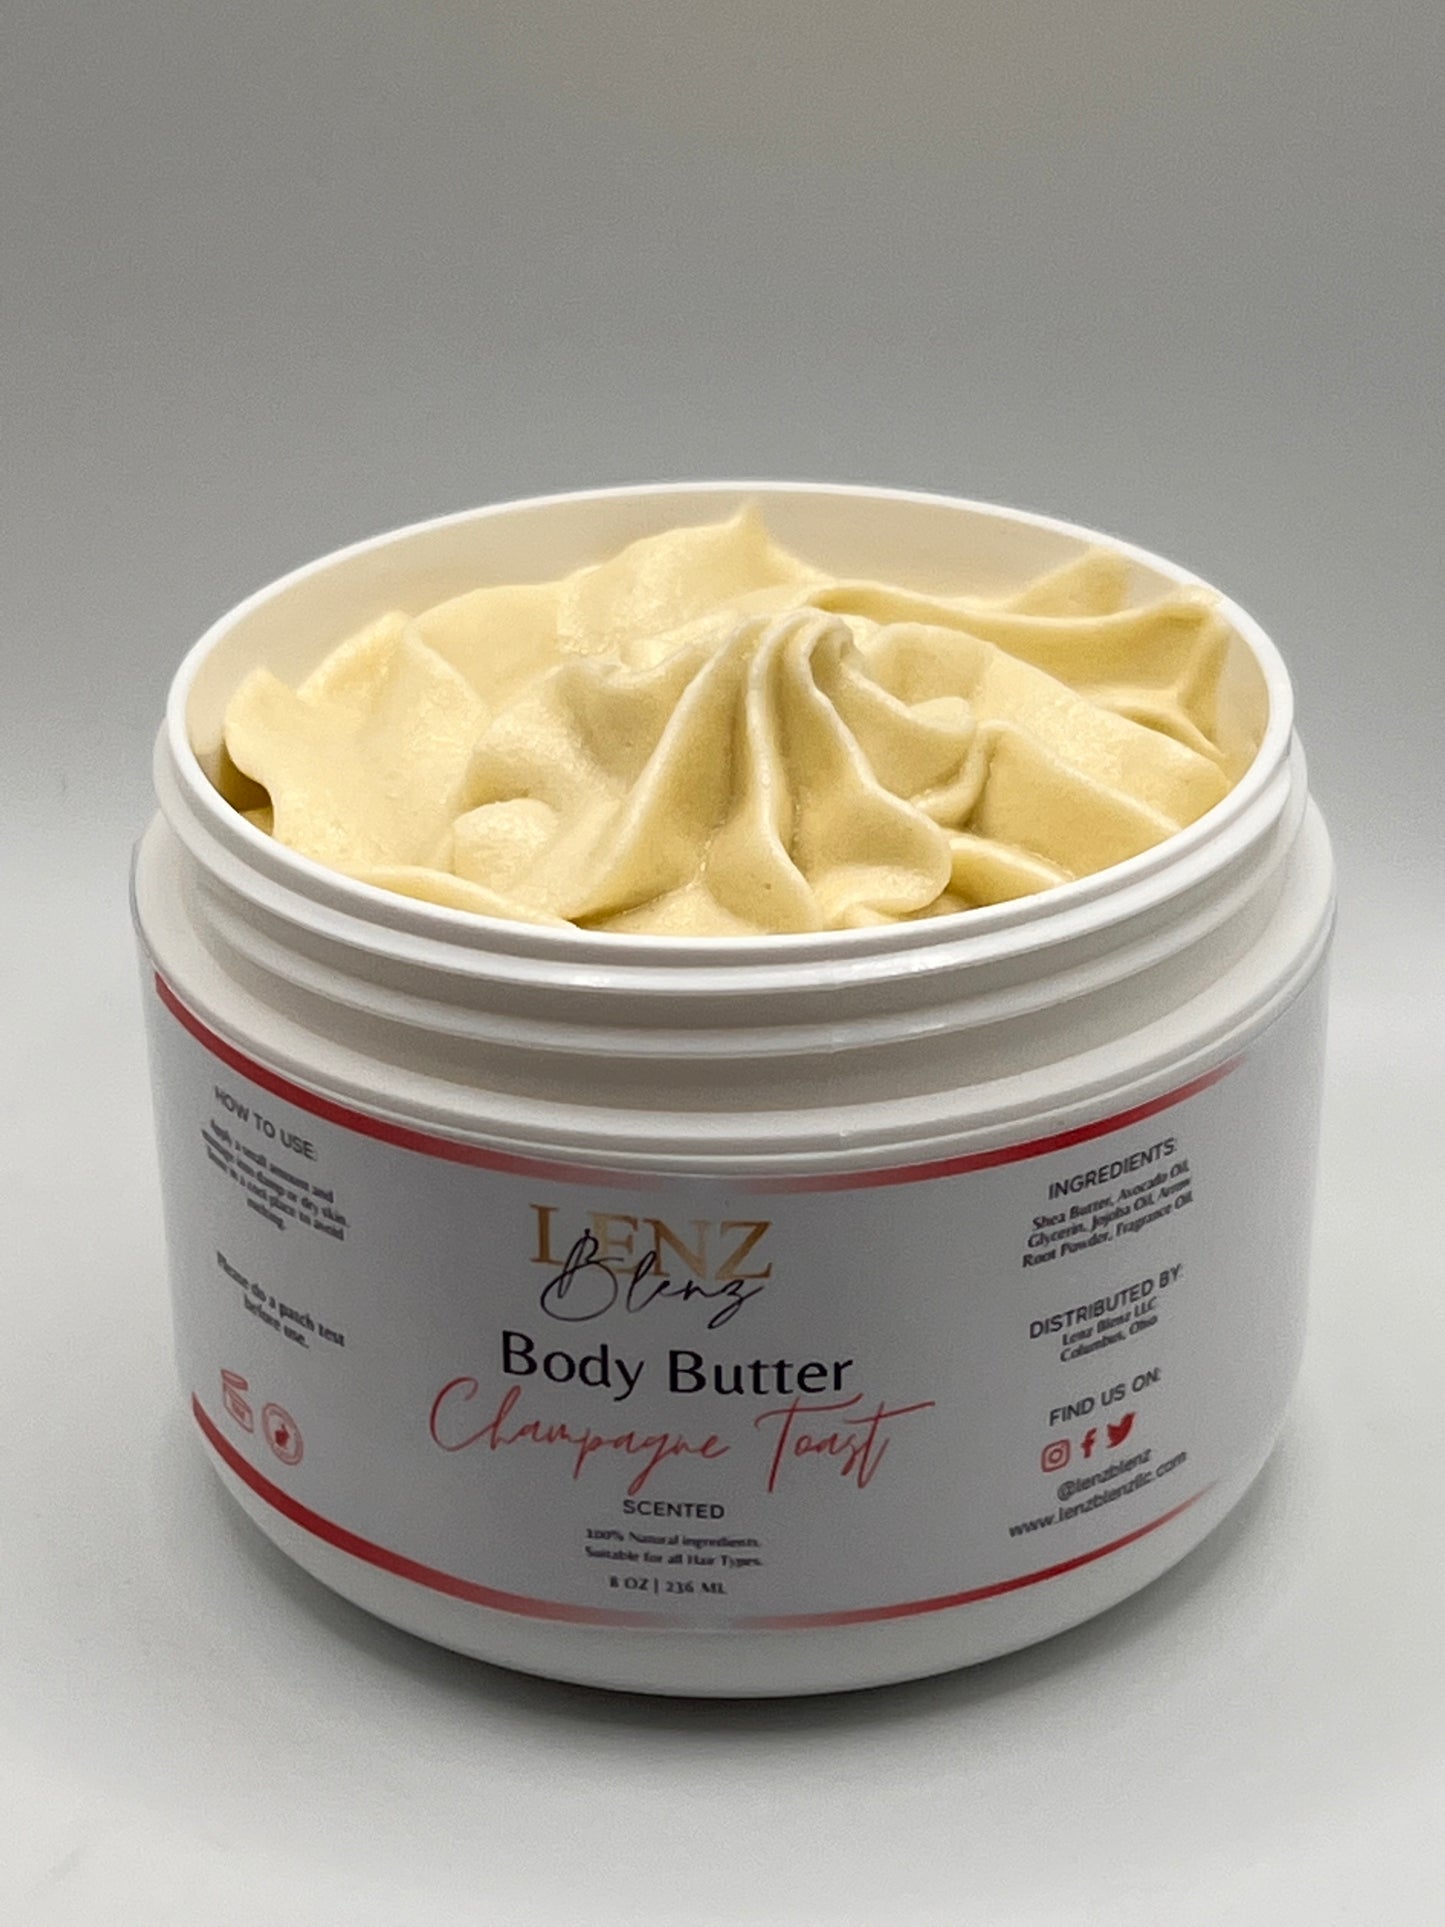 Champagne Toast Body Butter